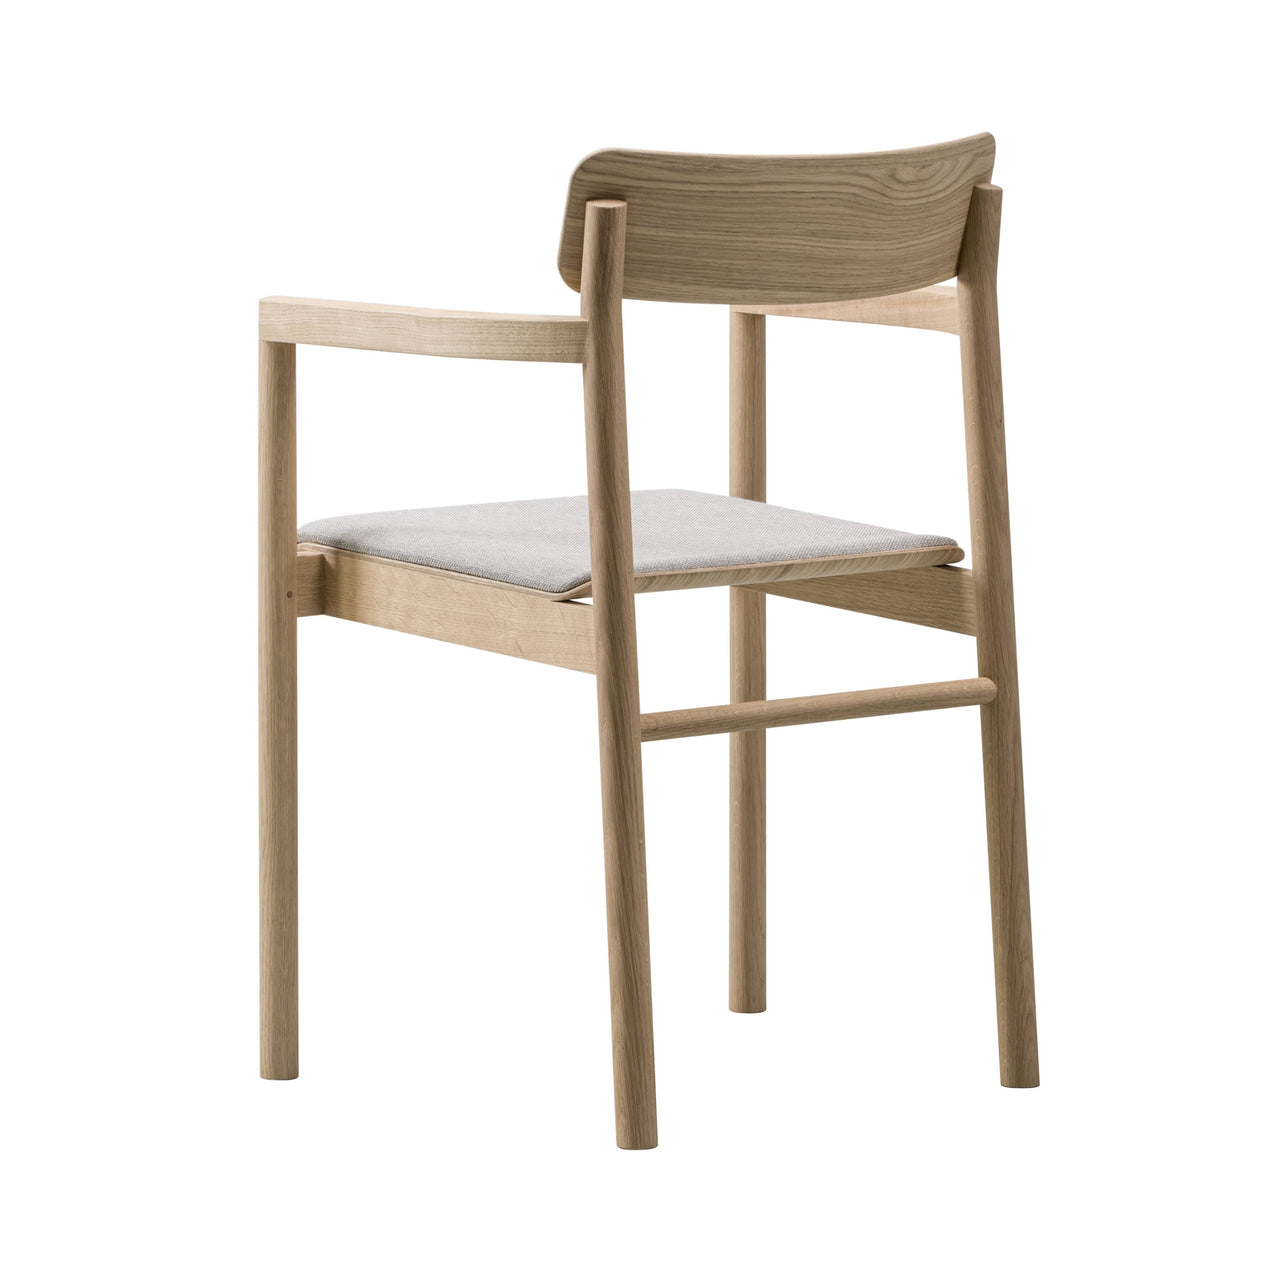 Post Chair: Seat Upholstered + Lacquered Oak